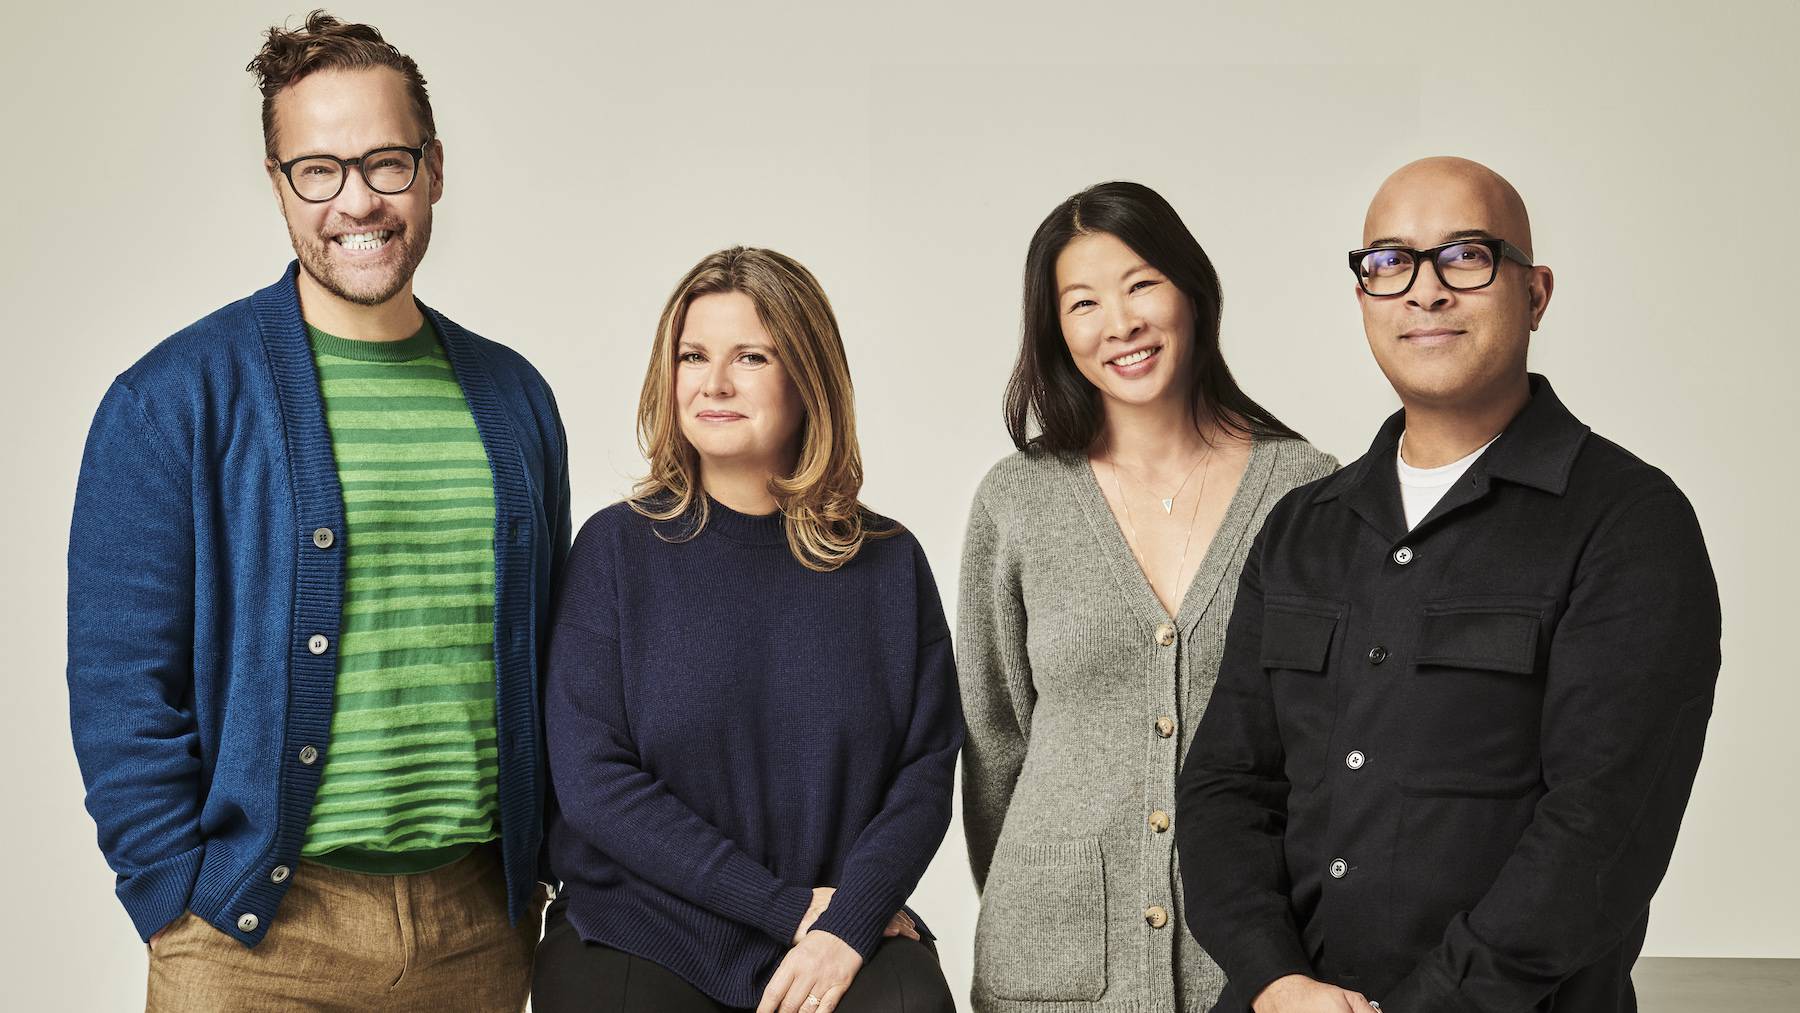 Prodject founders Tobias Armstrong, Jihye Song and Keith Baptista with The Independents CEO Isabelle Chouvet.